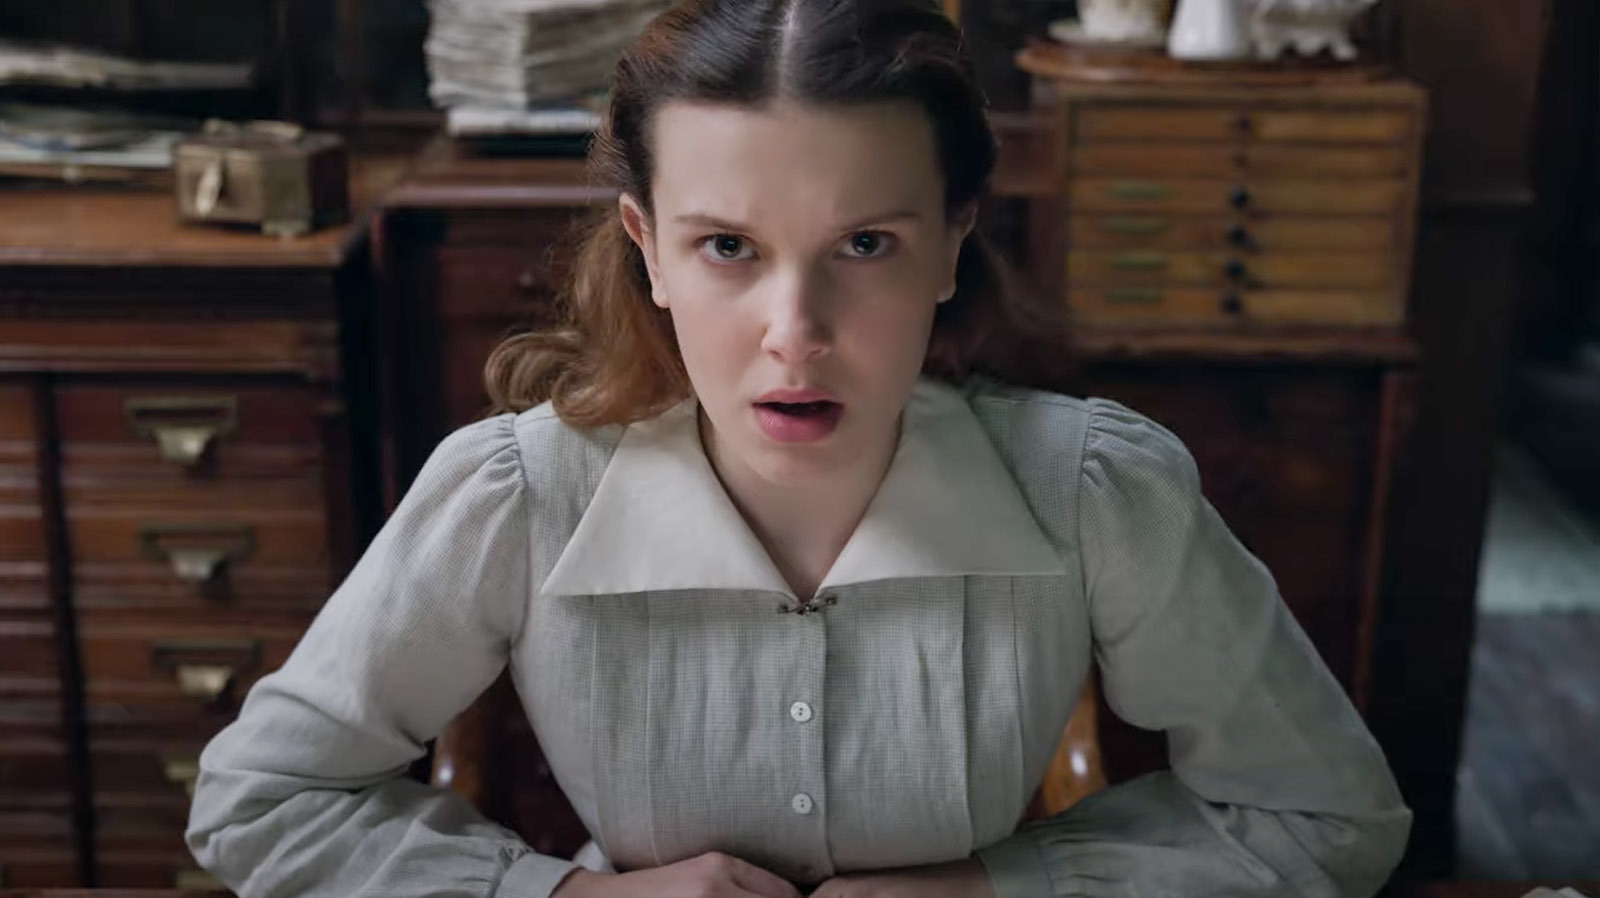 Enola Holmes 2 Trailer: Millie Bobby Brown Is Back On The Case